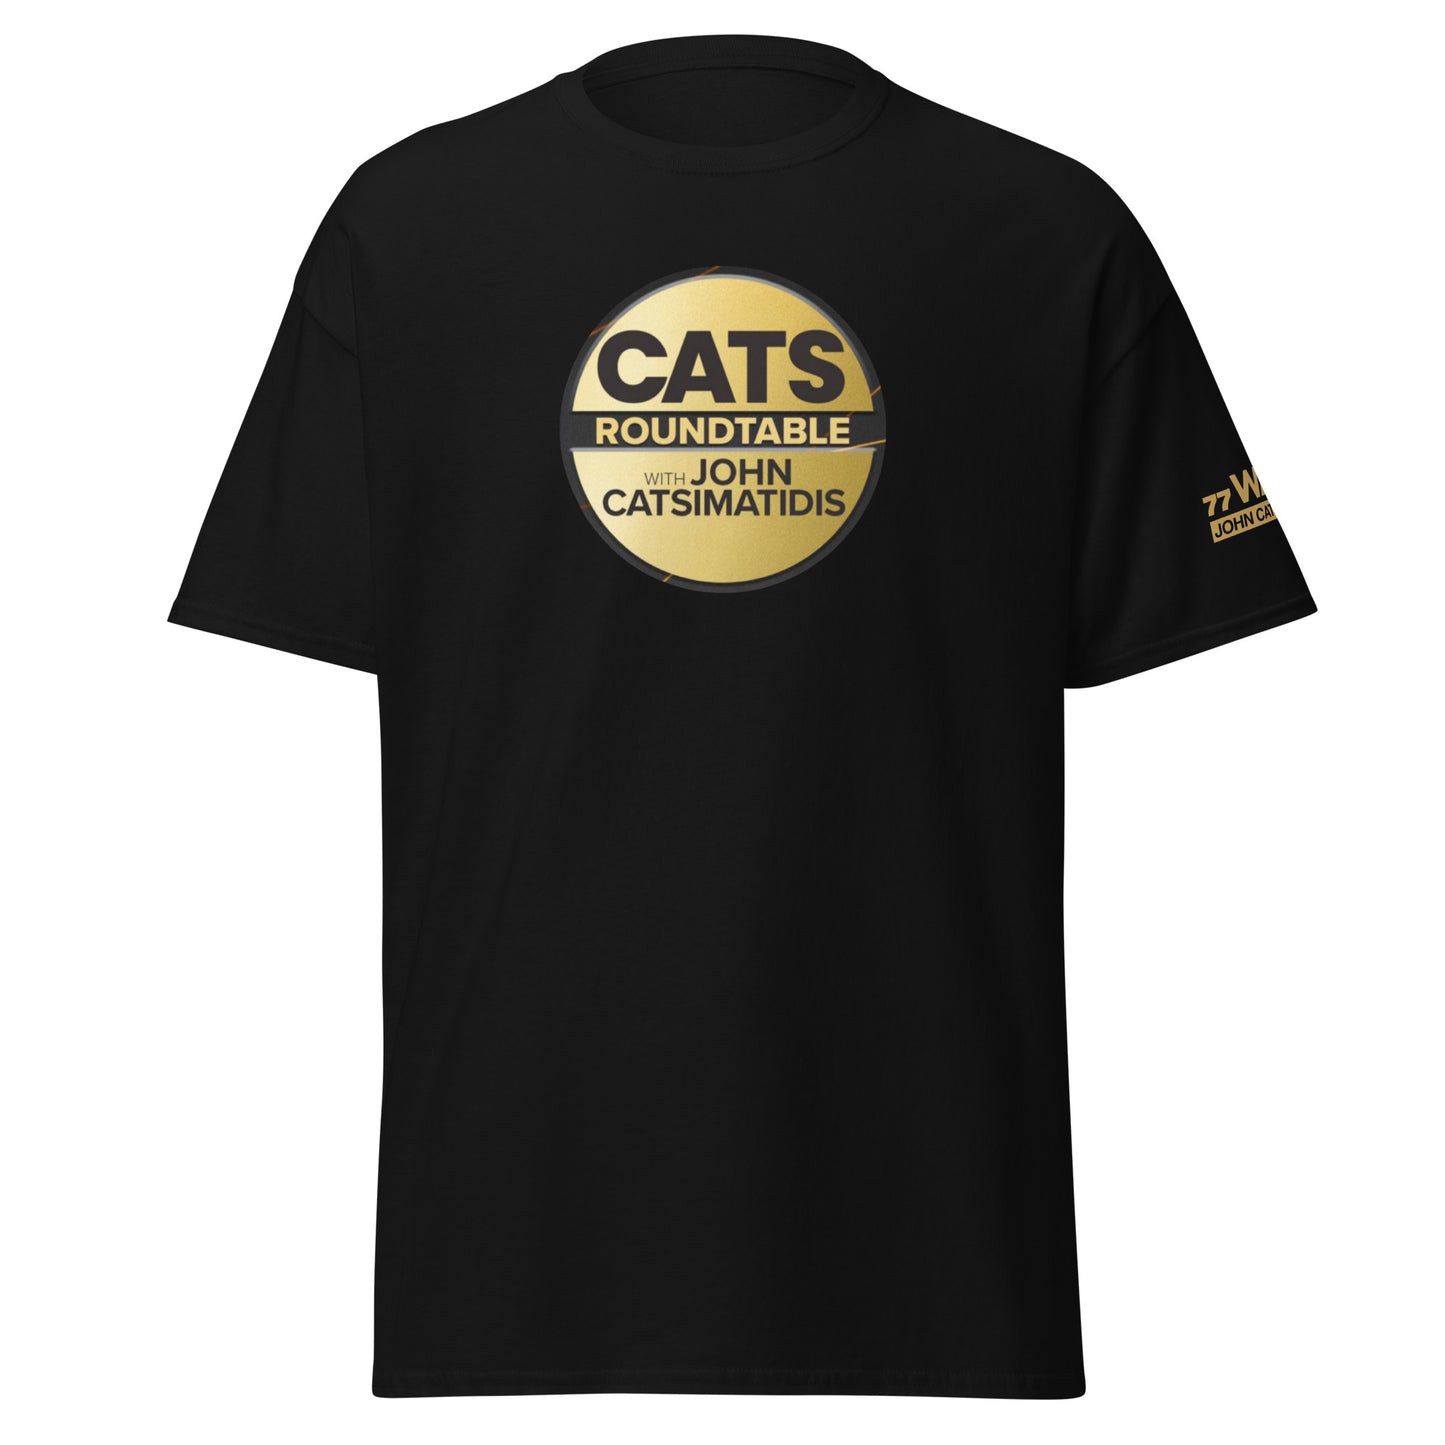 Cats Roundtable classic tee